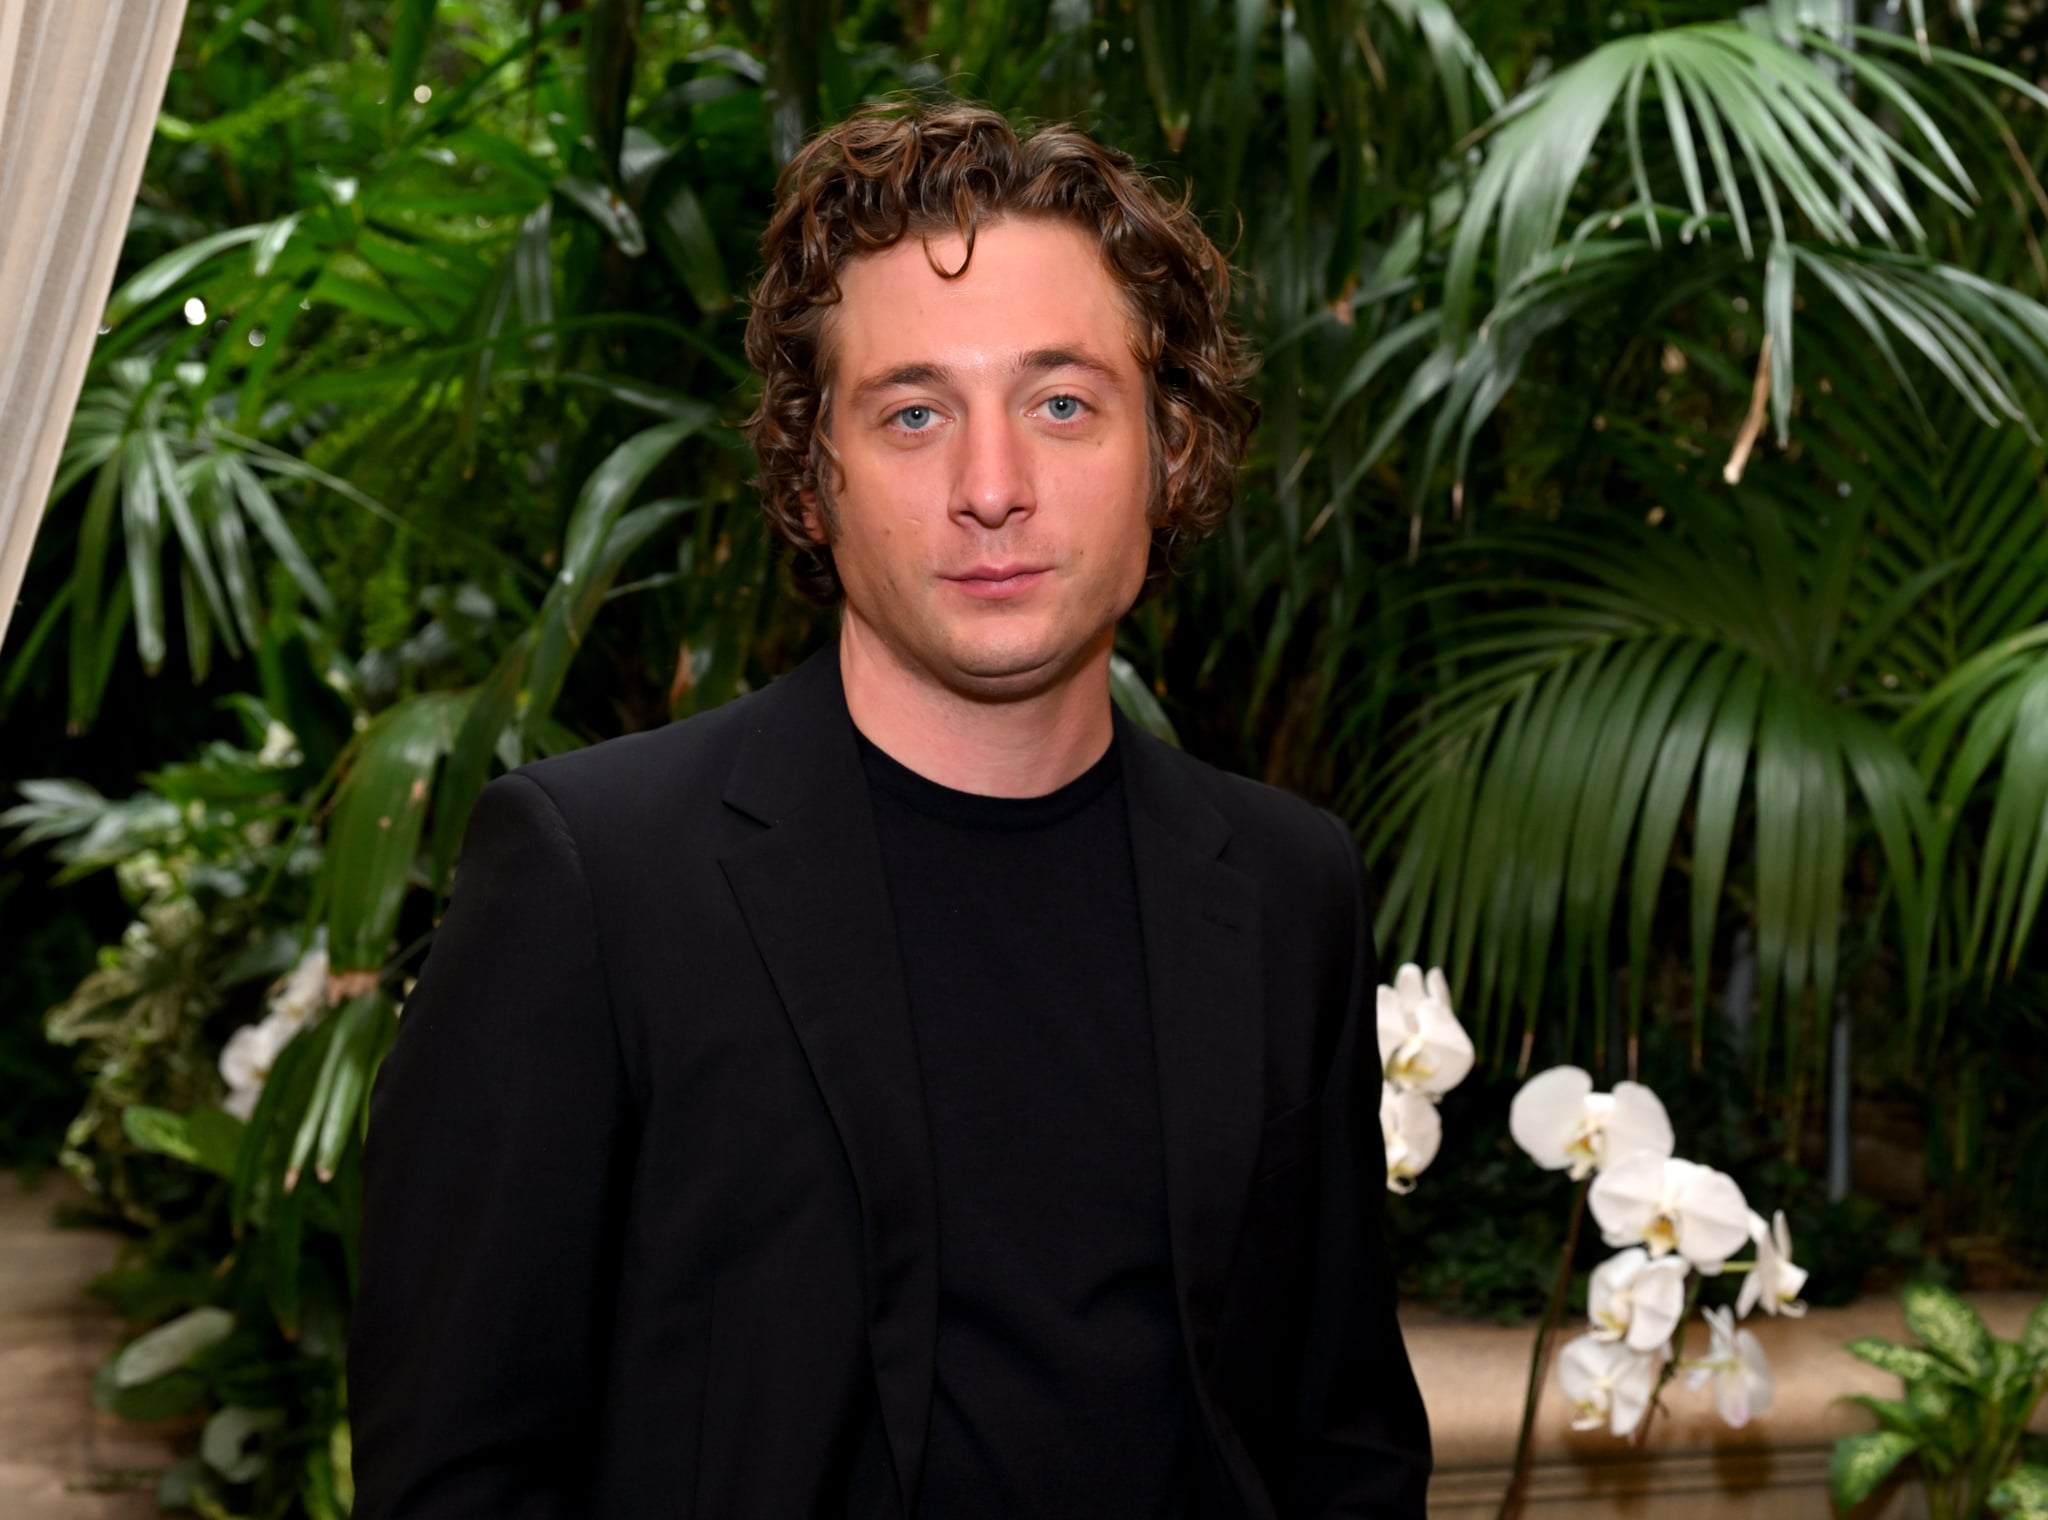 LOS ANGELES, CALIFORNIA - JANUARY 13: Jeremy Allen White attends the AFI Awards at Four Seasons Hotel Los Angeles at Beverly Hills on January 13, 2023 in Los Angeles, California. (Photo by Michael Kovac/Getty Images for AFI)